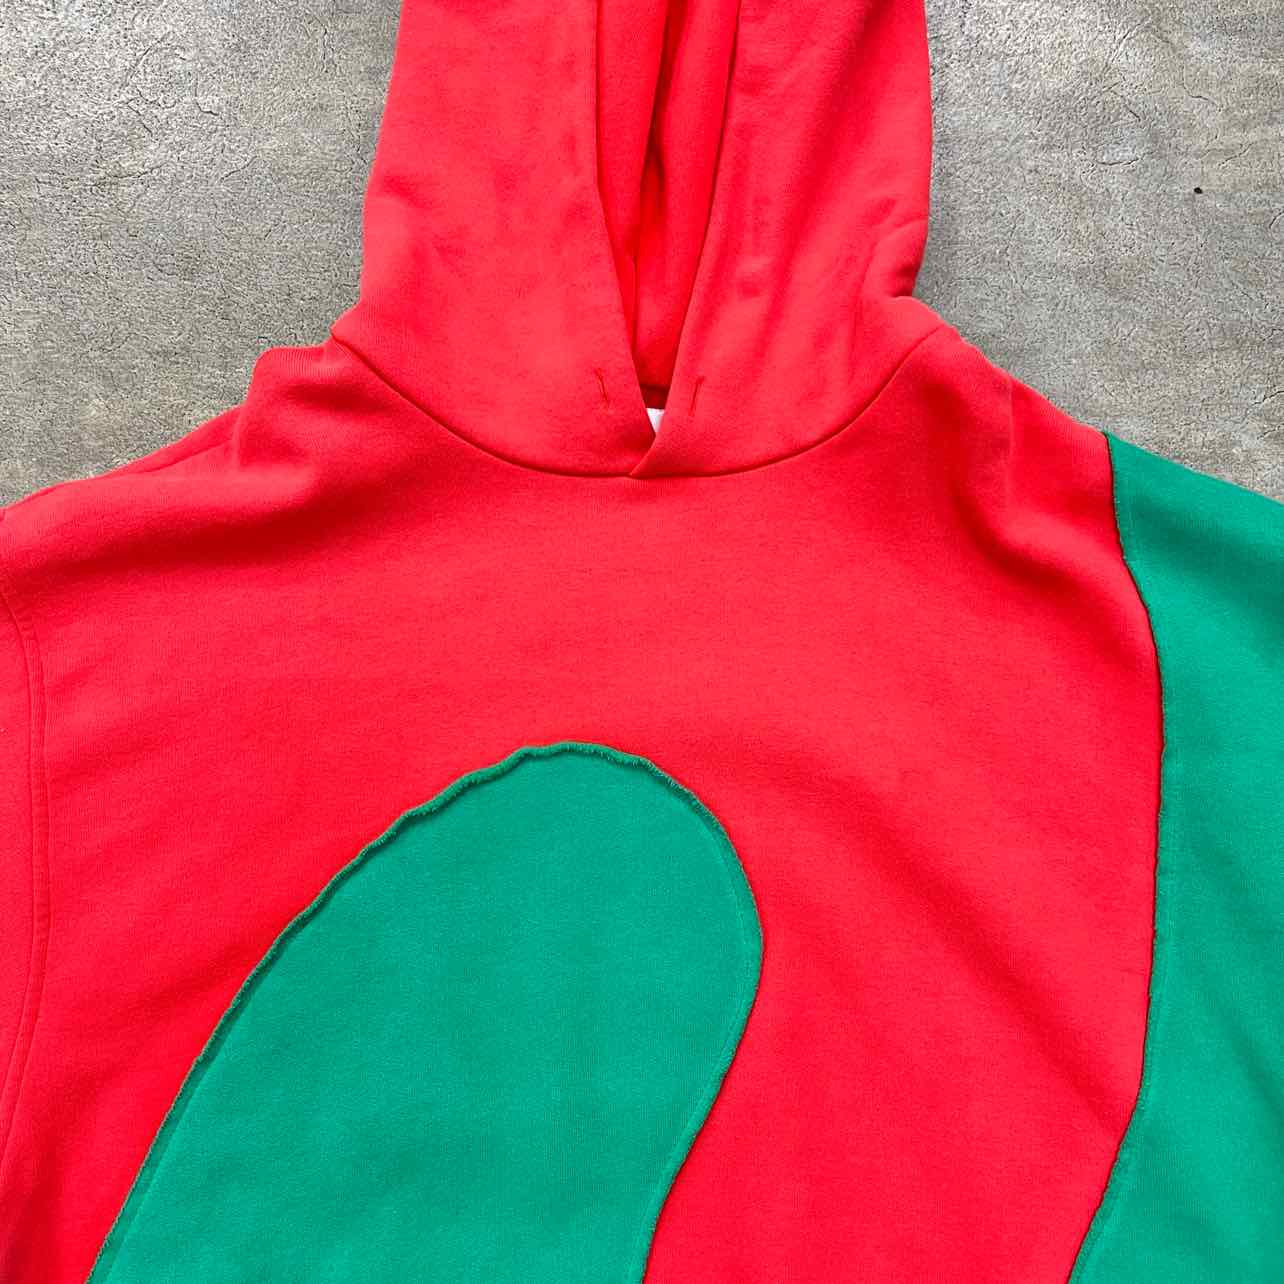 ERL Hoodie "SWIRL" Multi-Color Used Size M